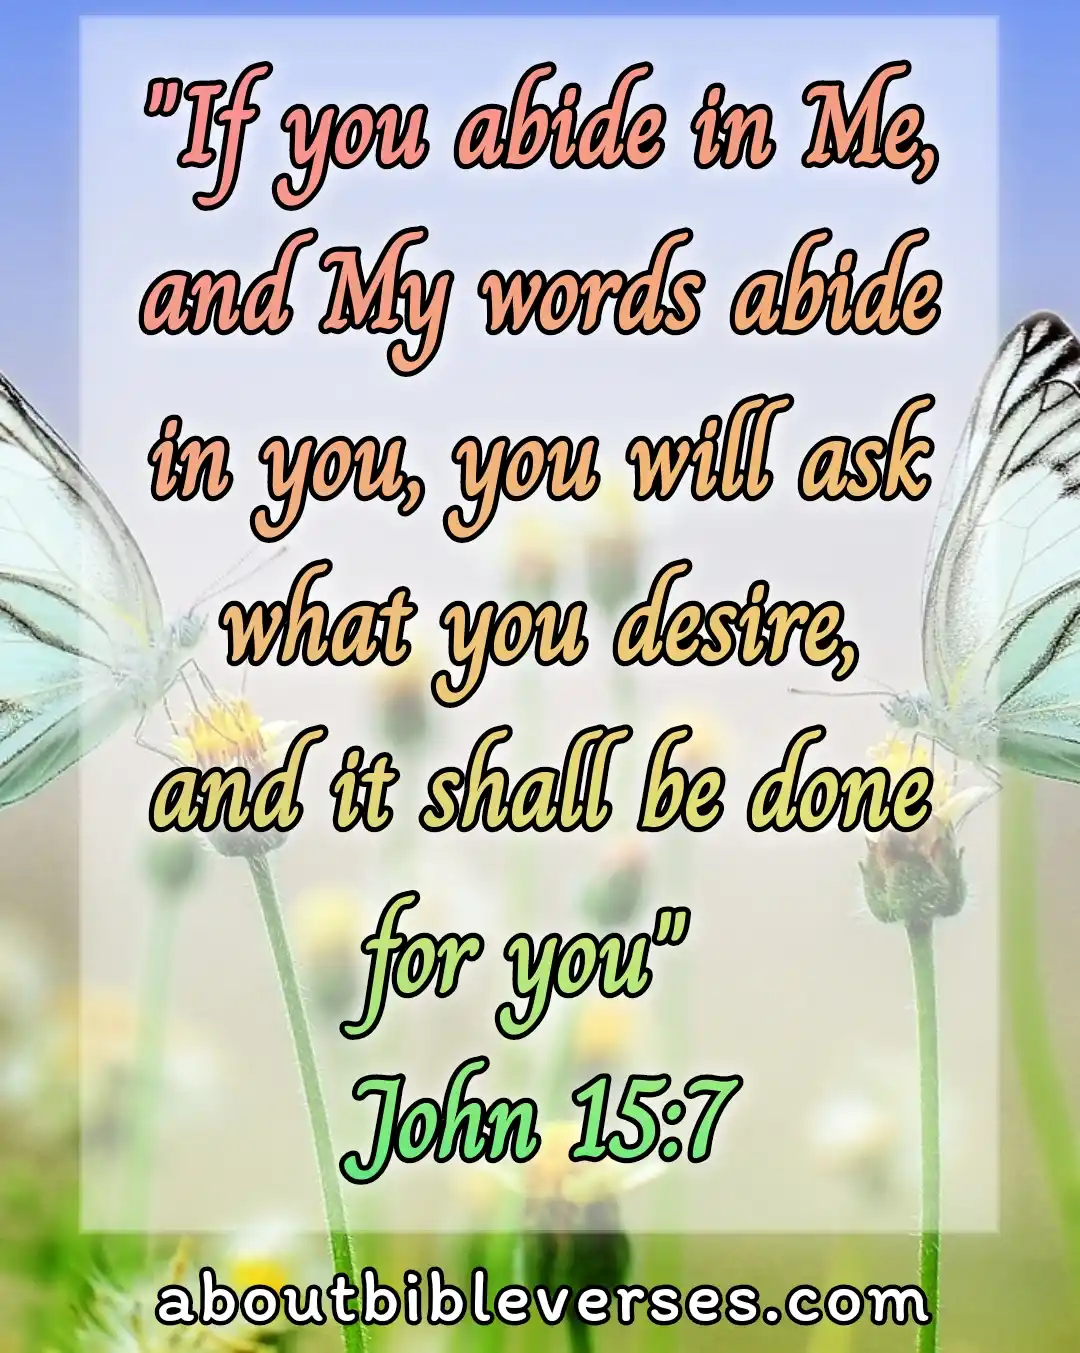 Bible Verse About Success In Business (John 15:7)